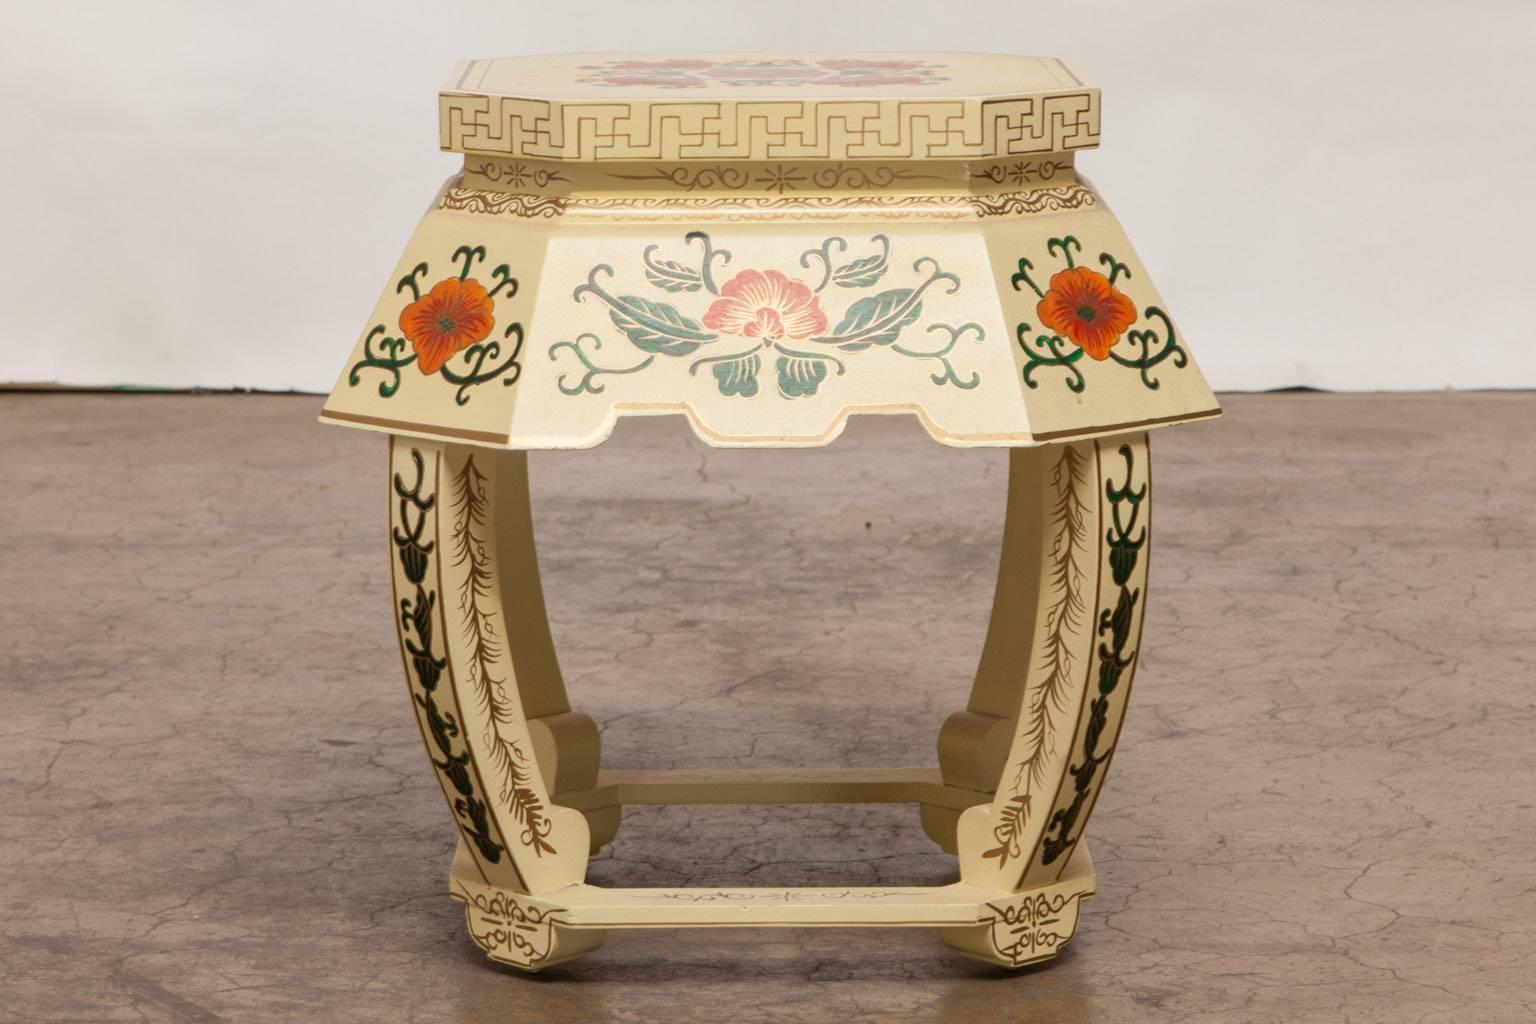 Colorful Chinese garden stool or plant stand featuring a cream ground with hand-painted floral and foliate decoration with gilt accents. Supported by four curved legs and a box frame base under a large shaped apron. This would also make a great